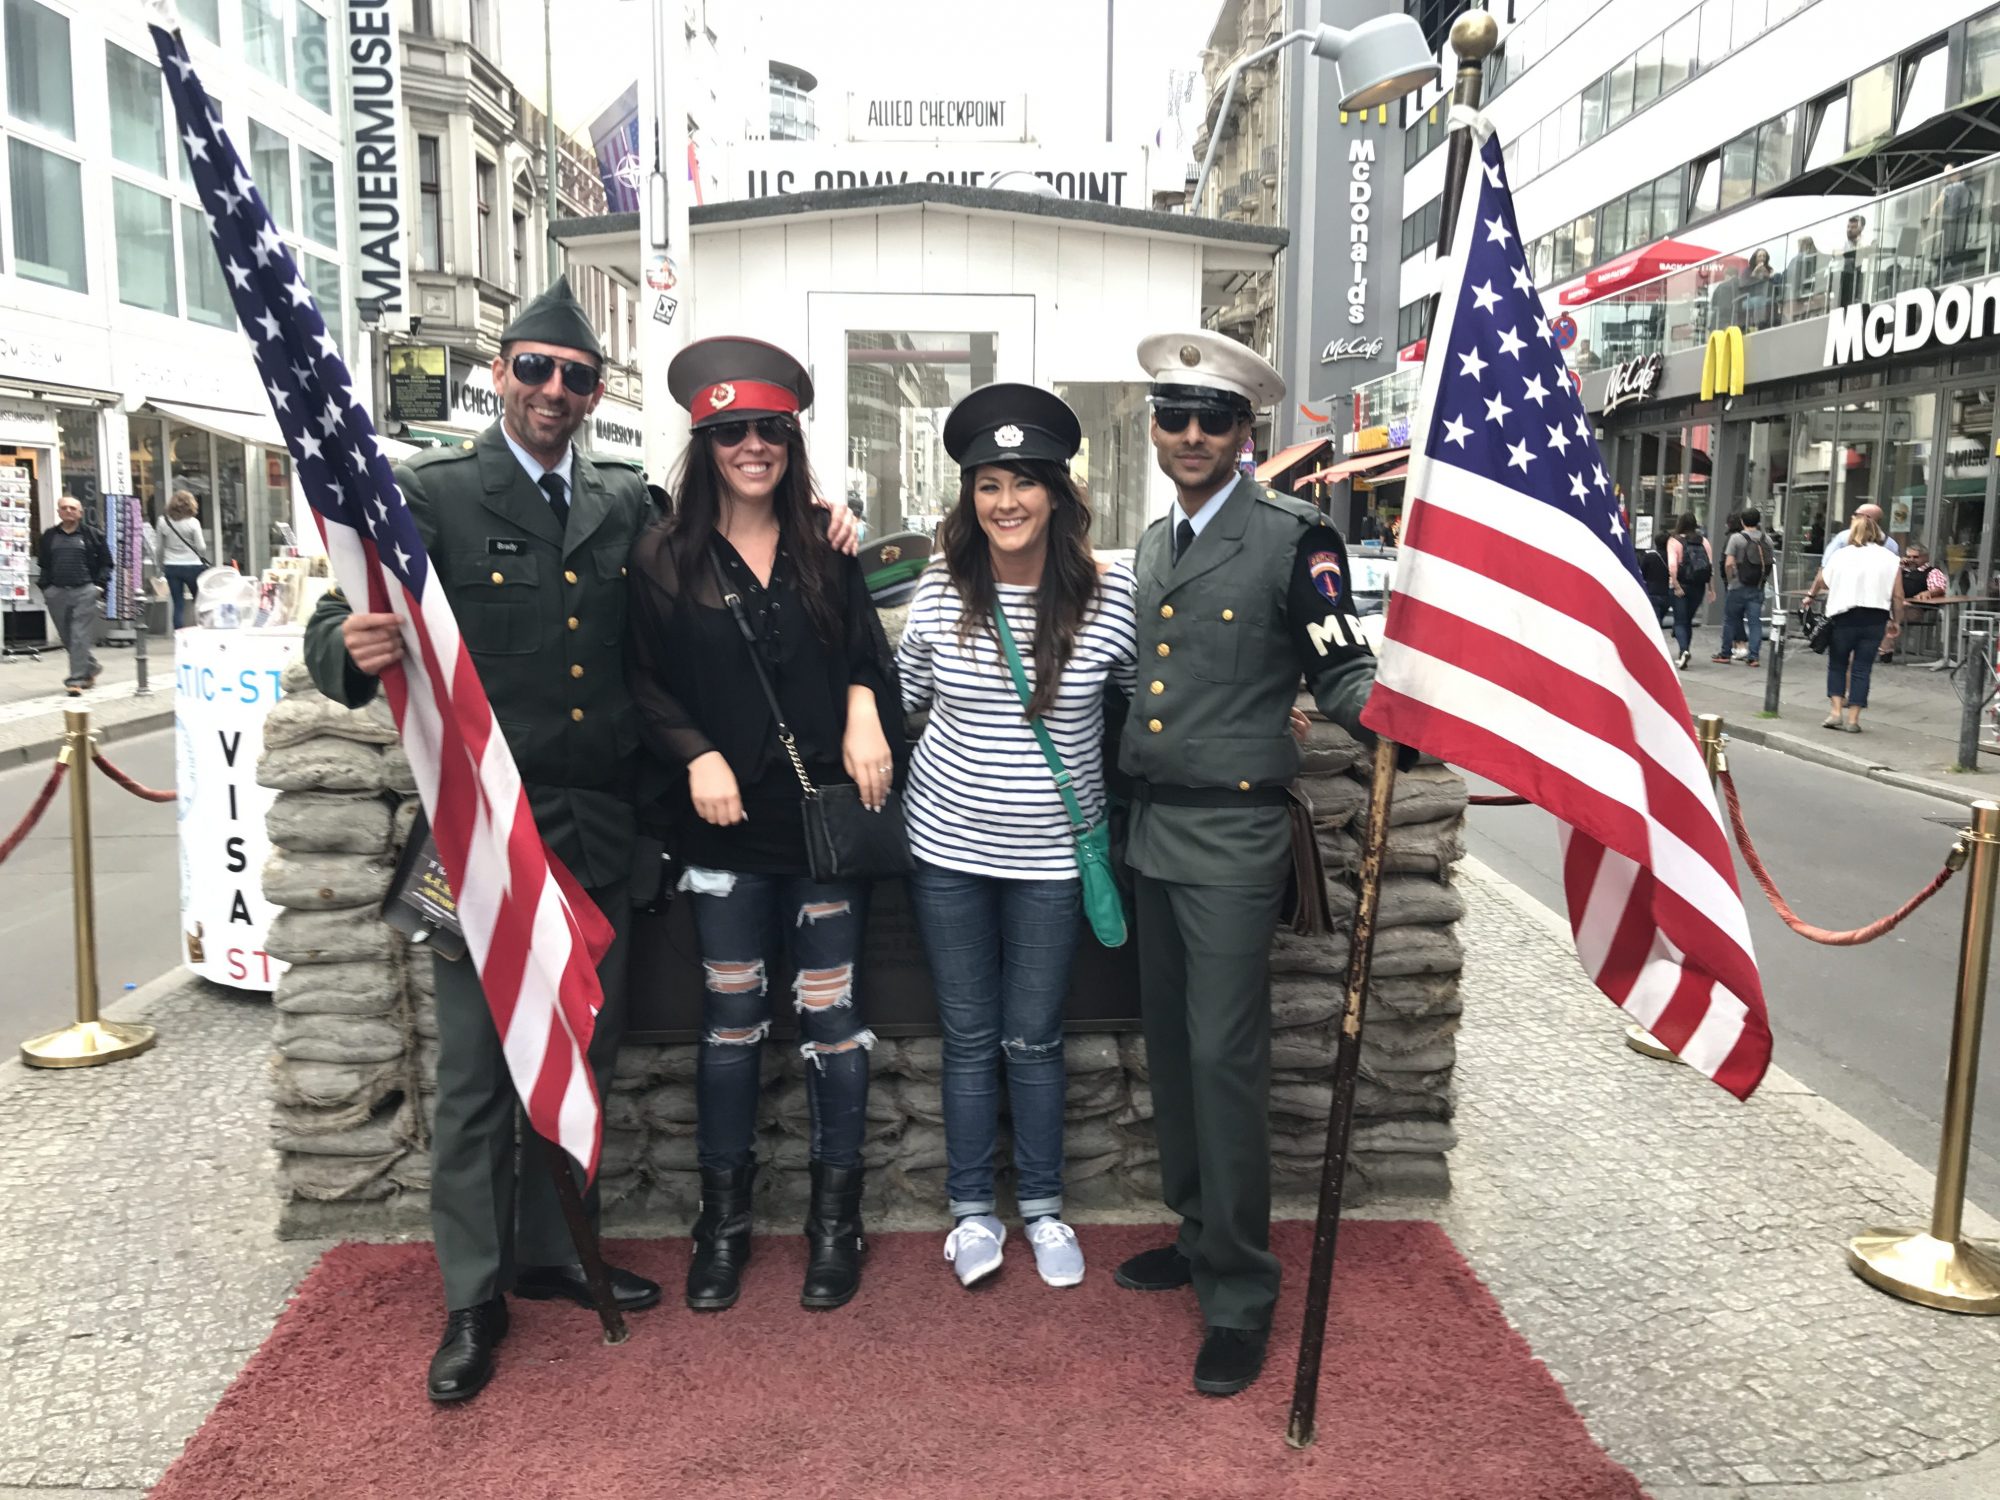 Checkpoint Charlie "guards" with two friends posing for pictures